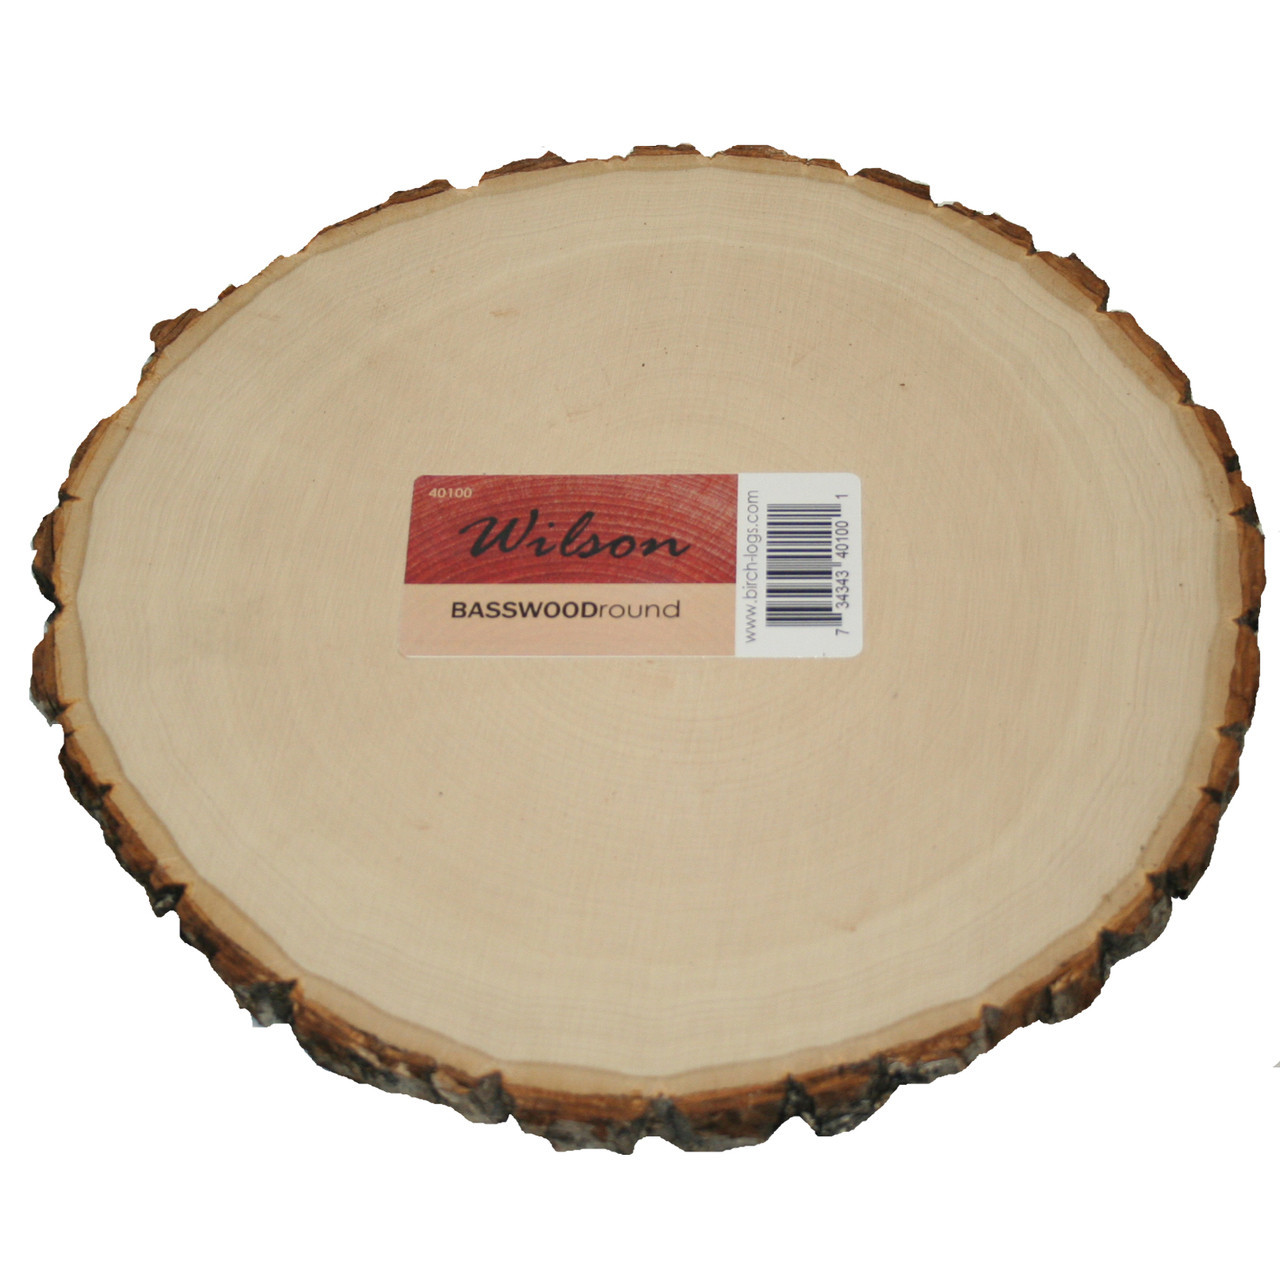 Basswood Round- Plate Charger - Birch Logs